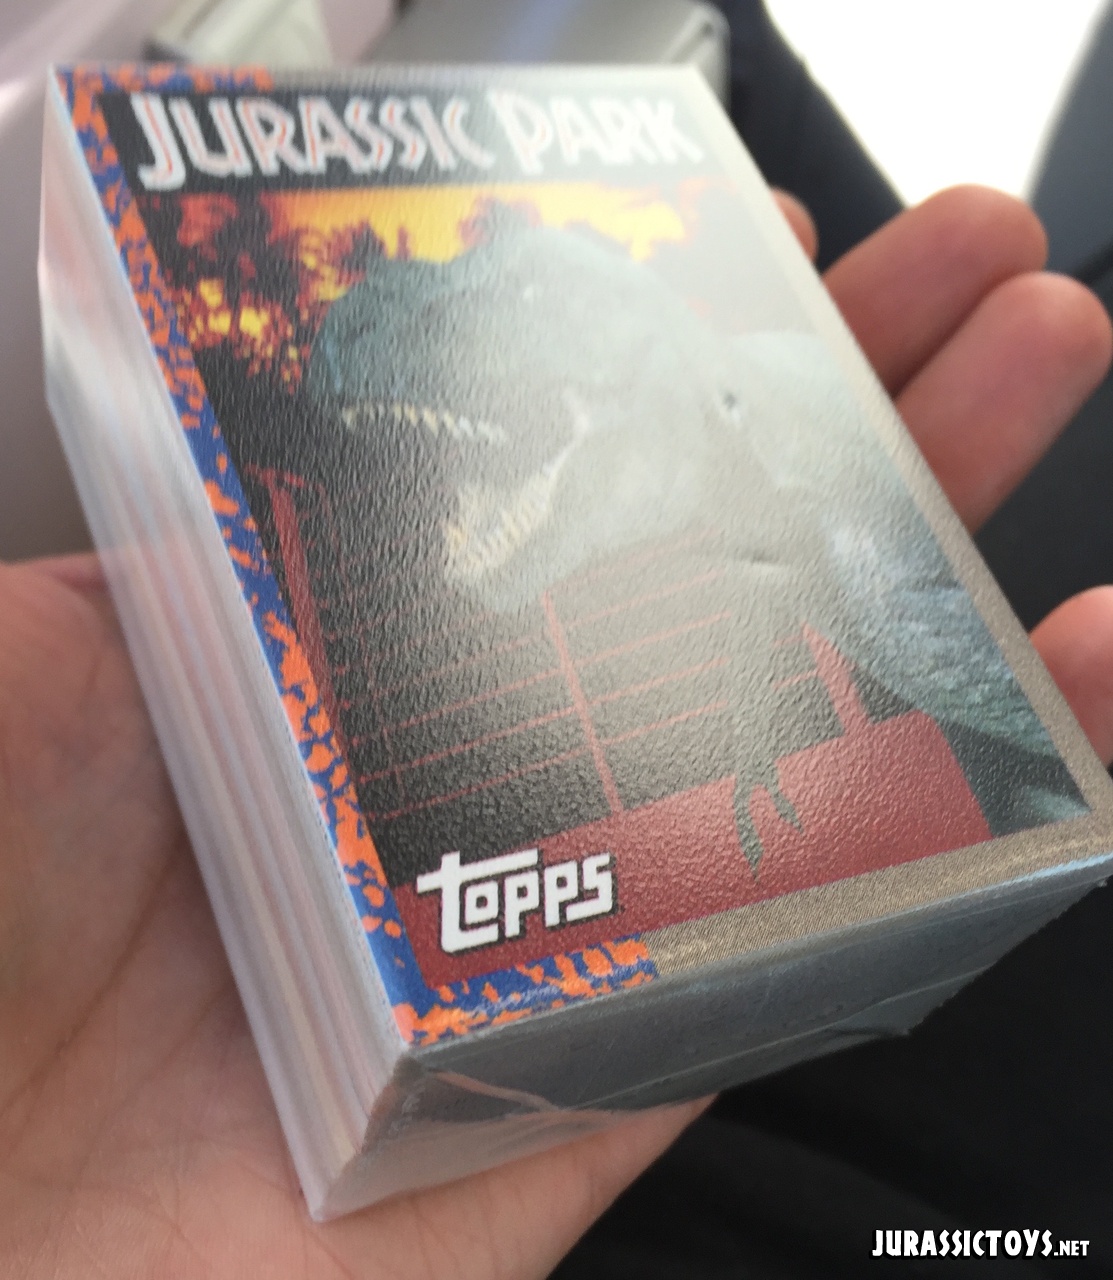 Jurassic Park Topps collector cards